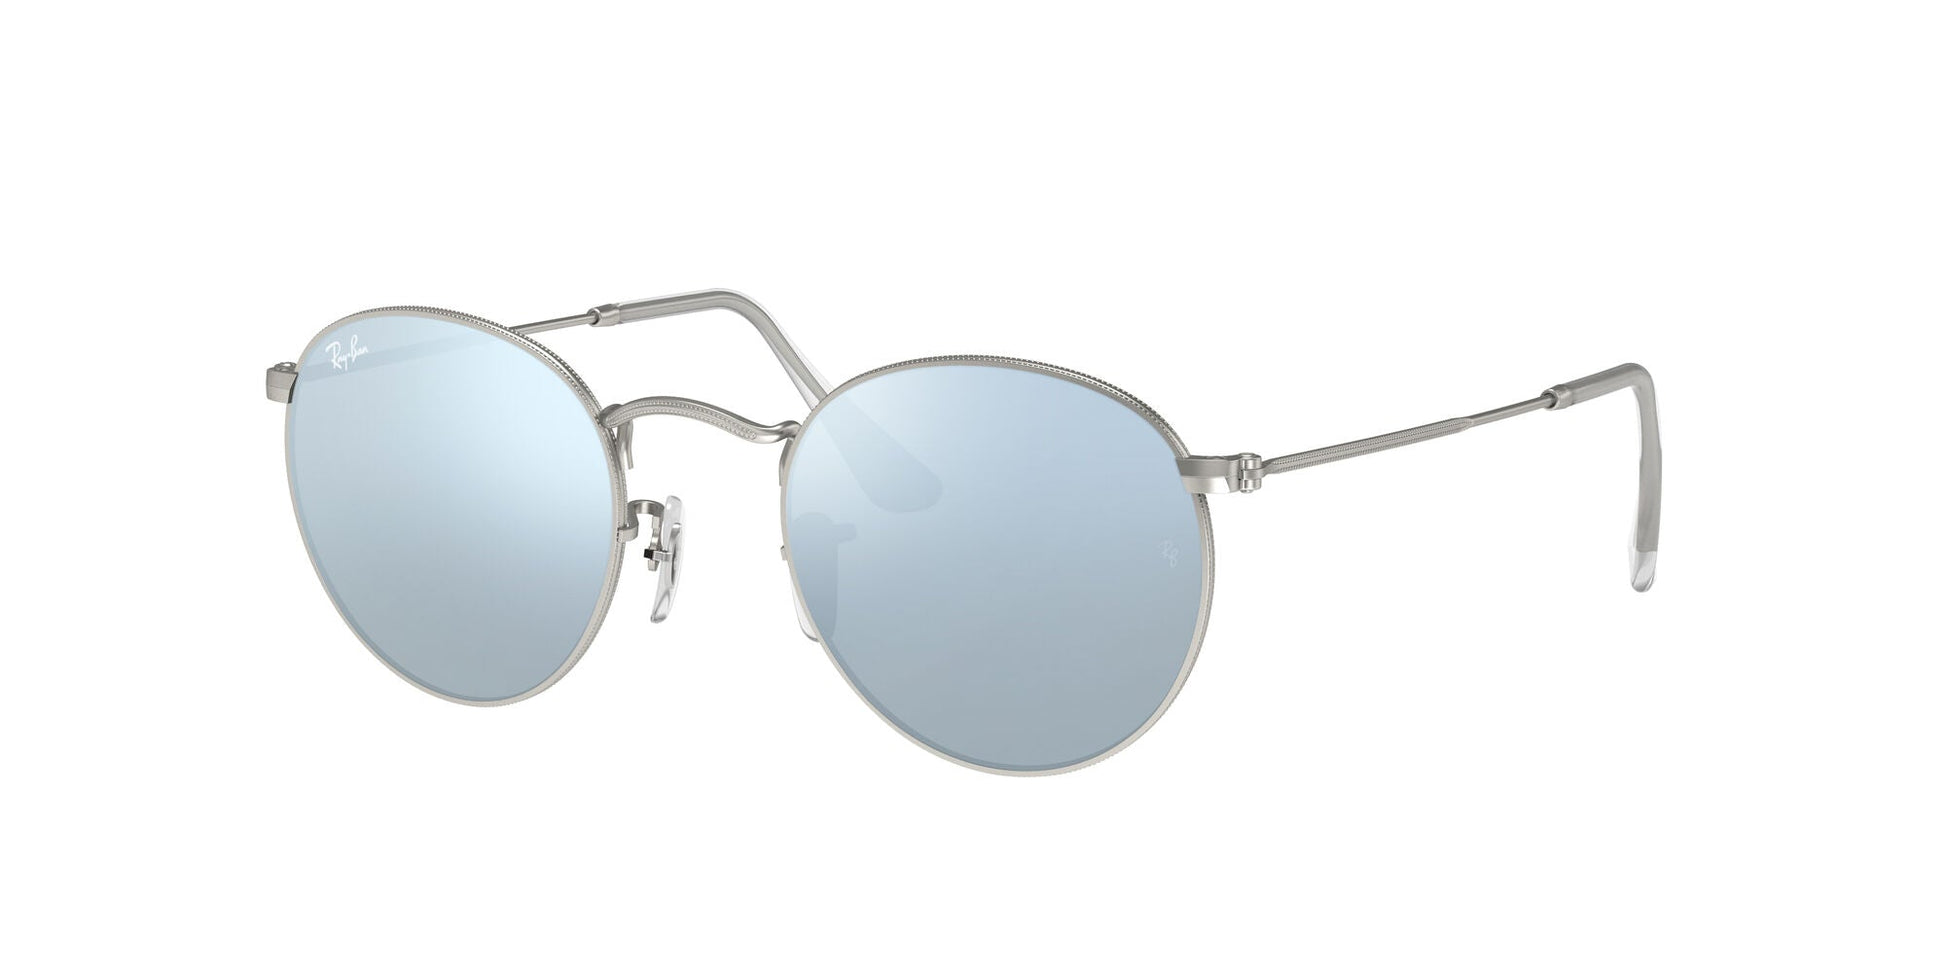 Ray-Ban 0RB3447 019/30 Argento Ray-Ban